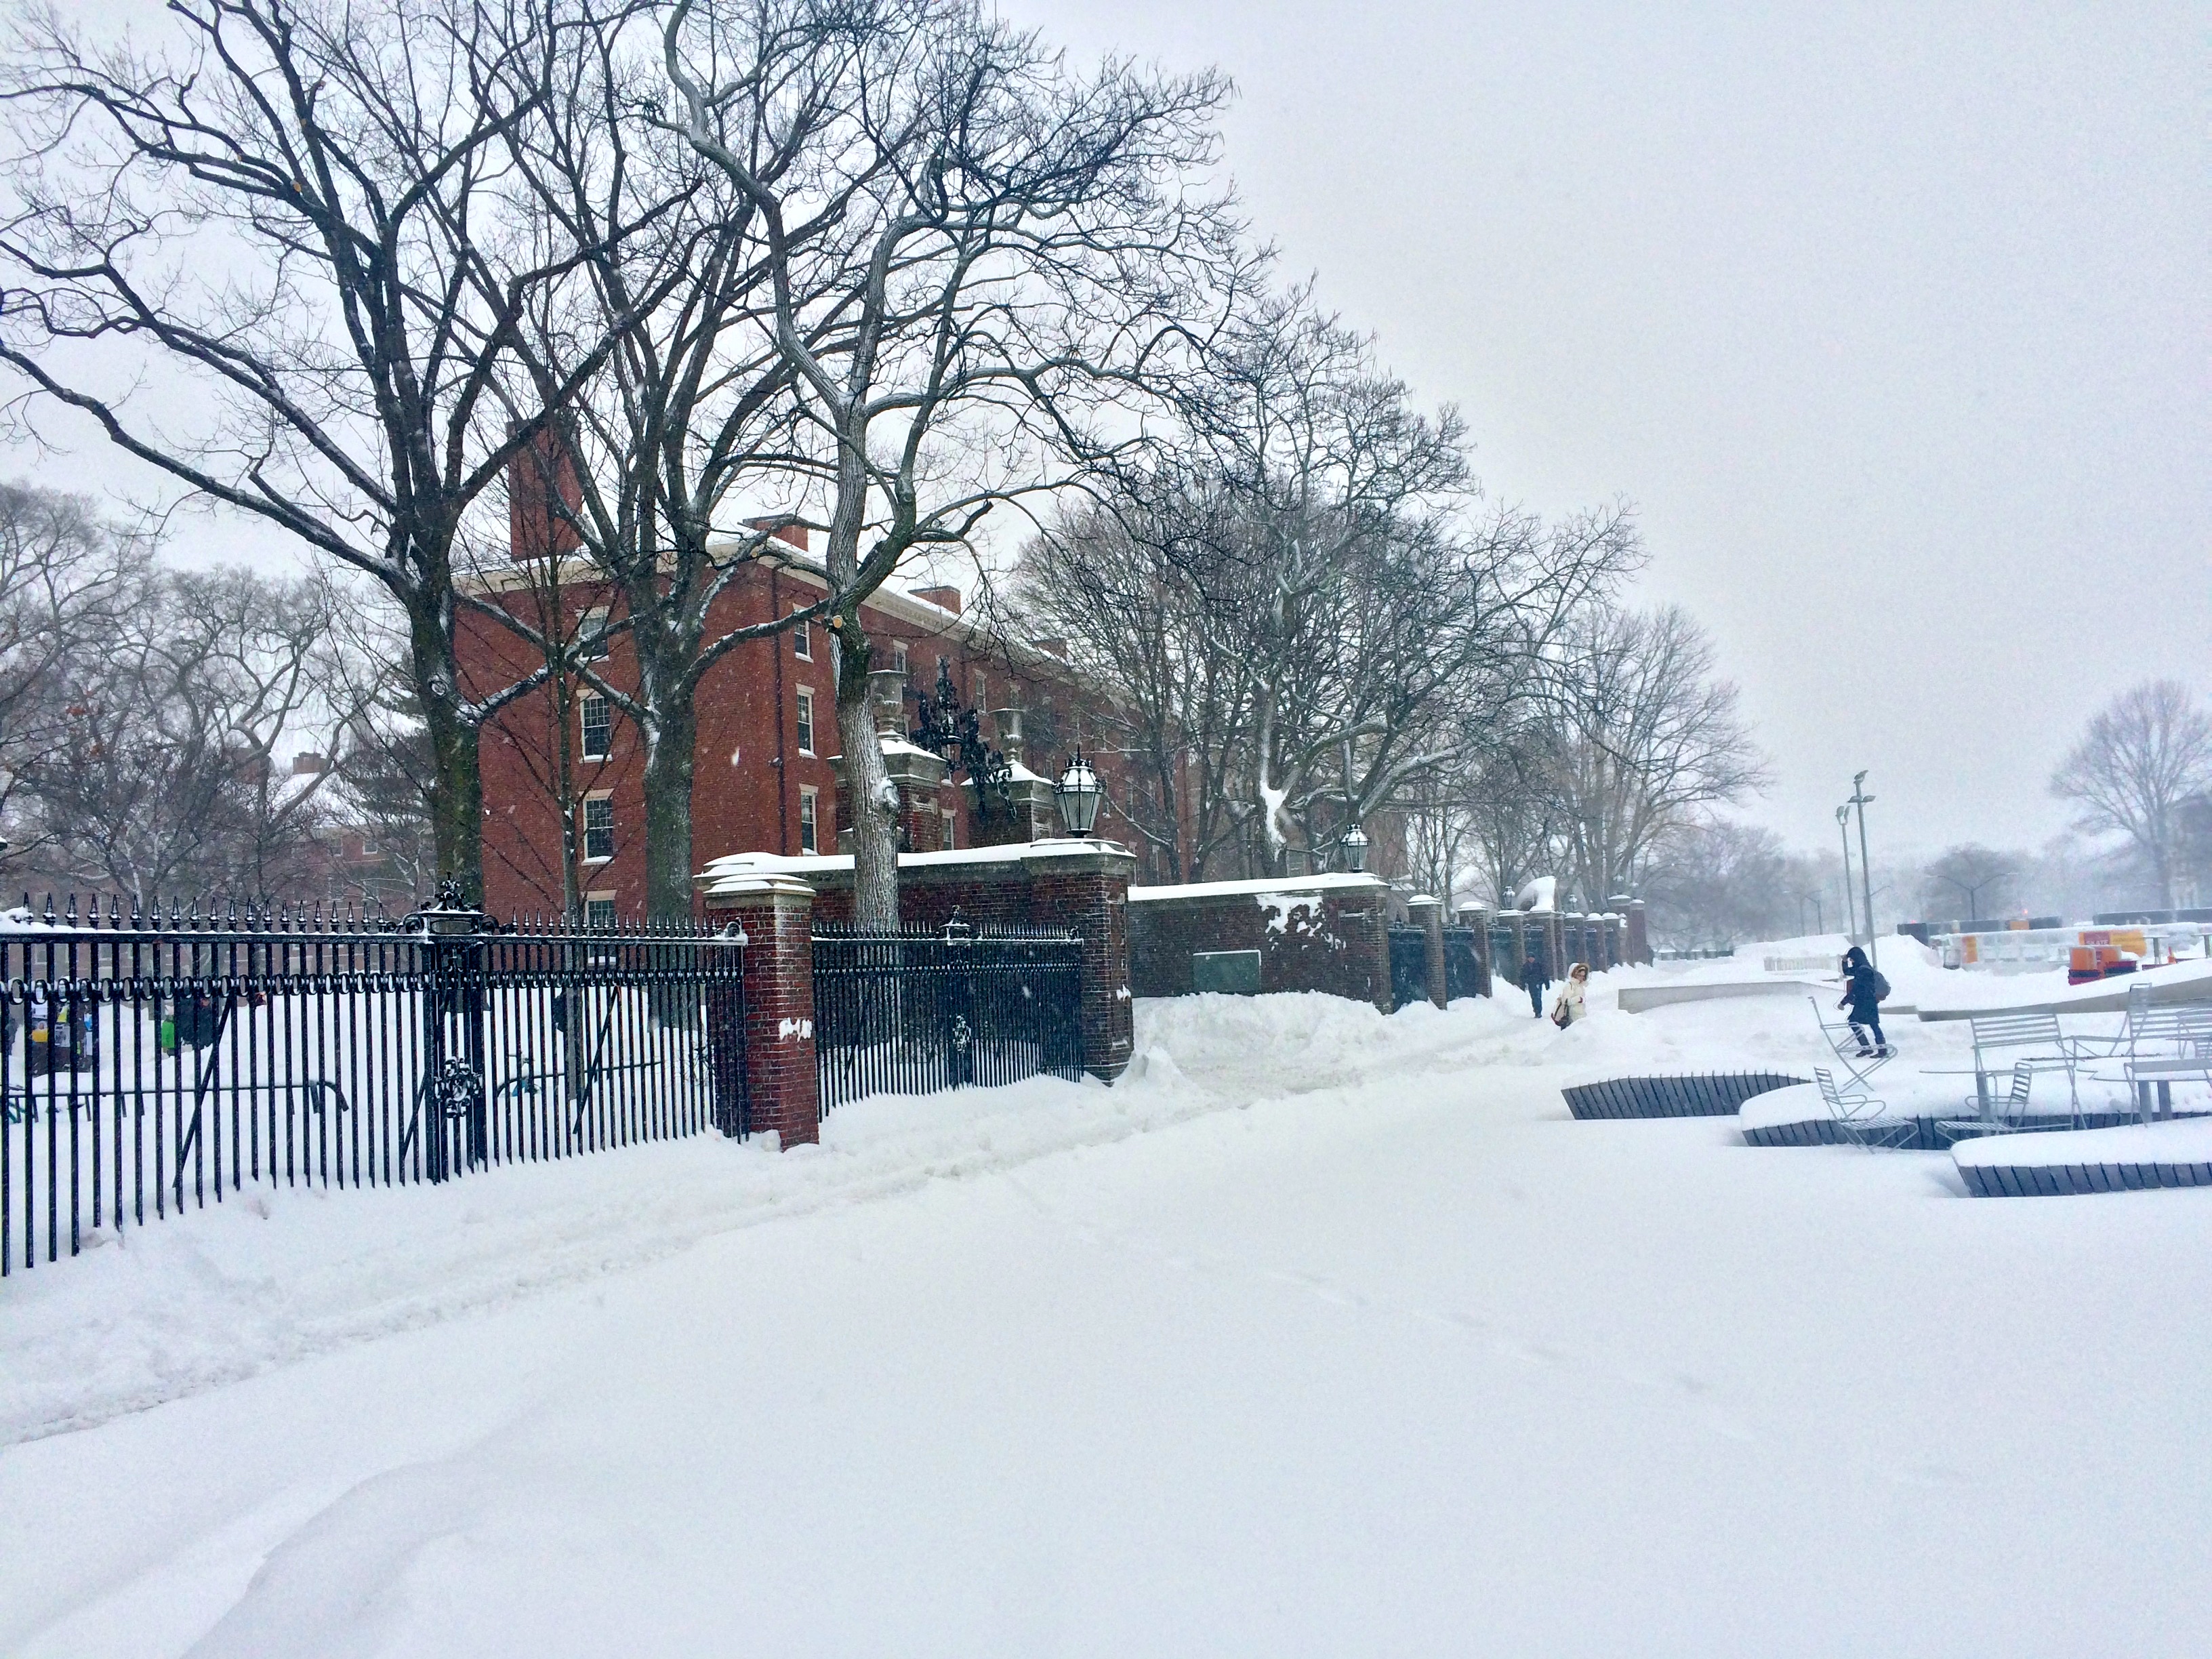 10 Reasons Winter at Harvard is Actually Awesome | Harvard College